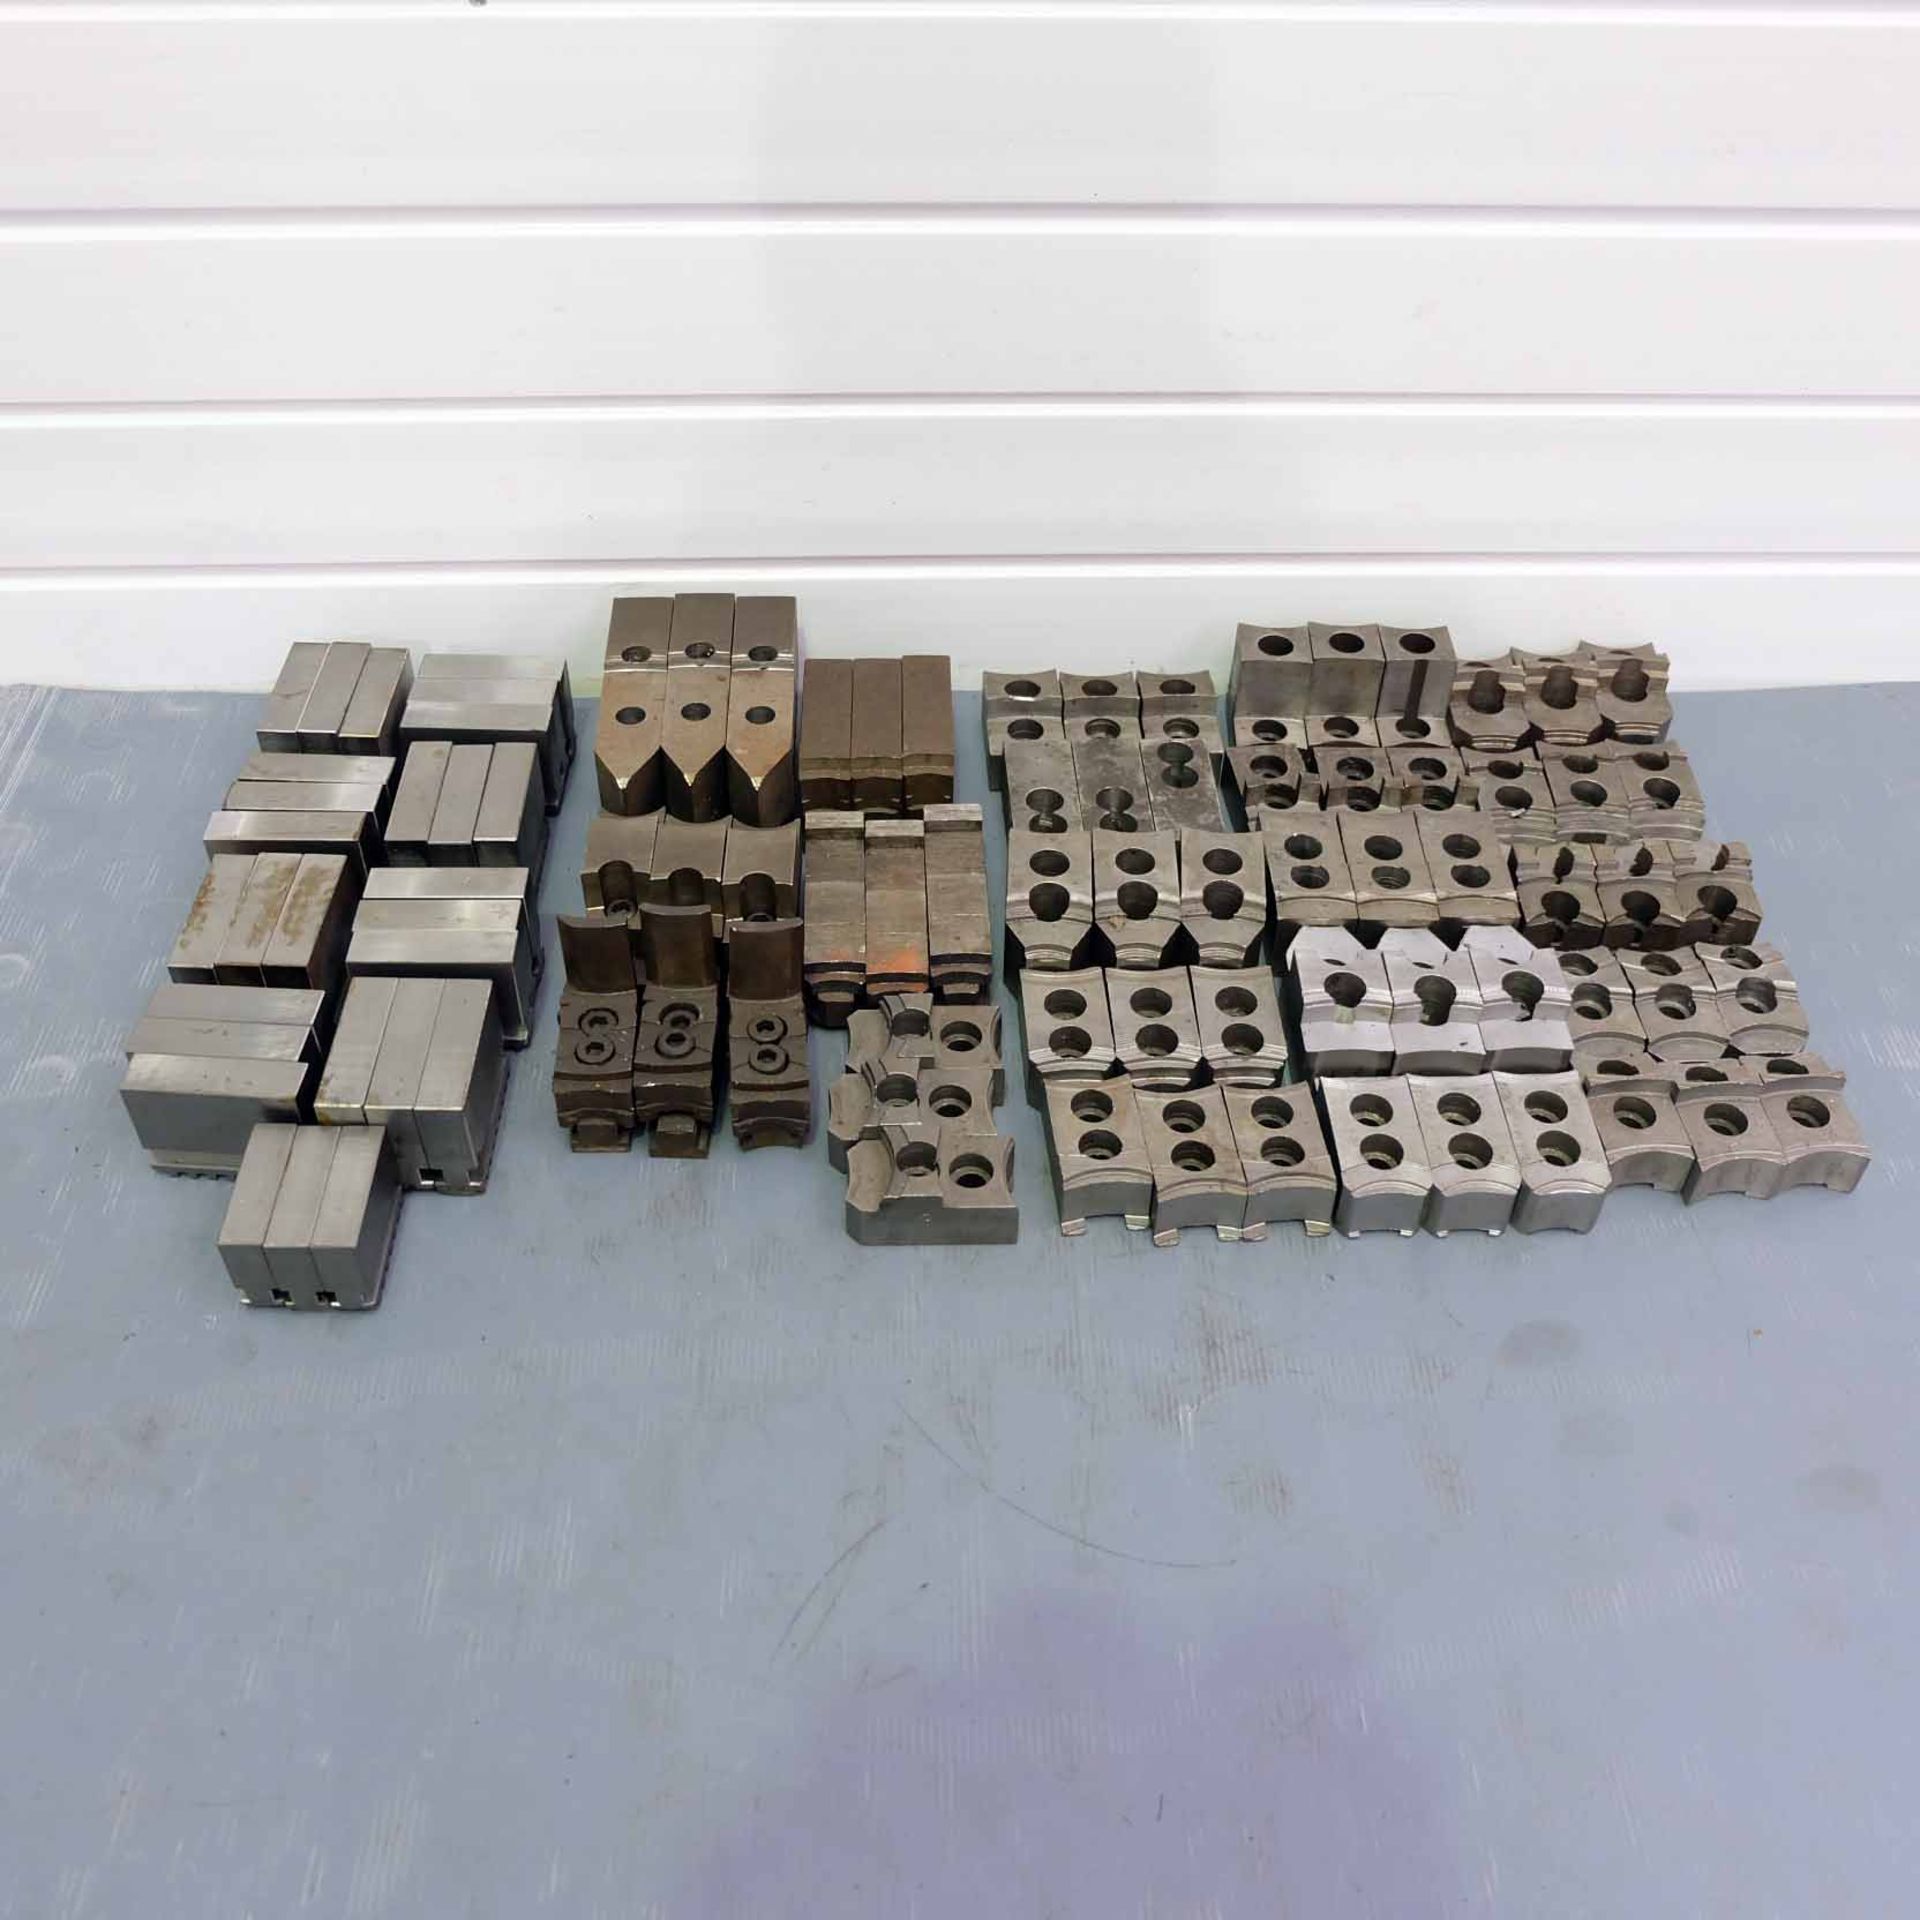 Quantity of Serrated & Scroll Type Soft Jaws. Various Shapes & Sizes.